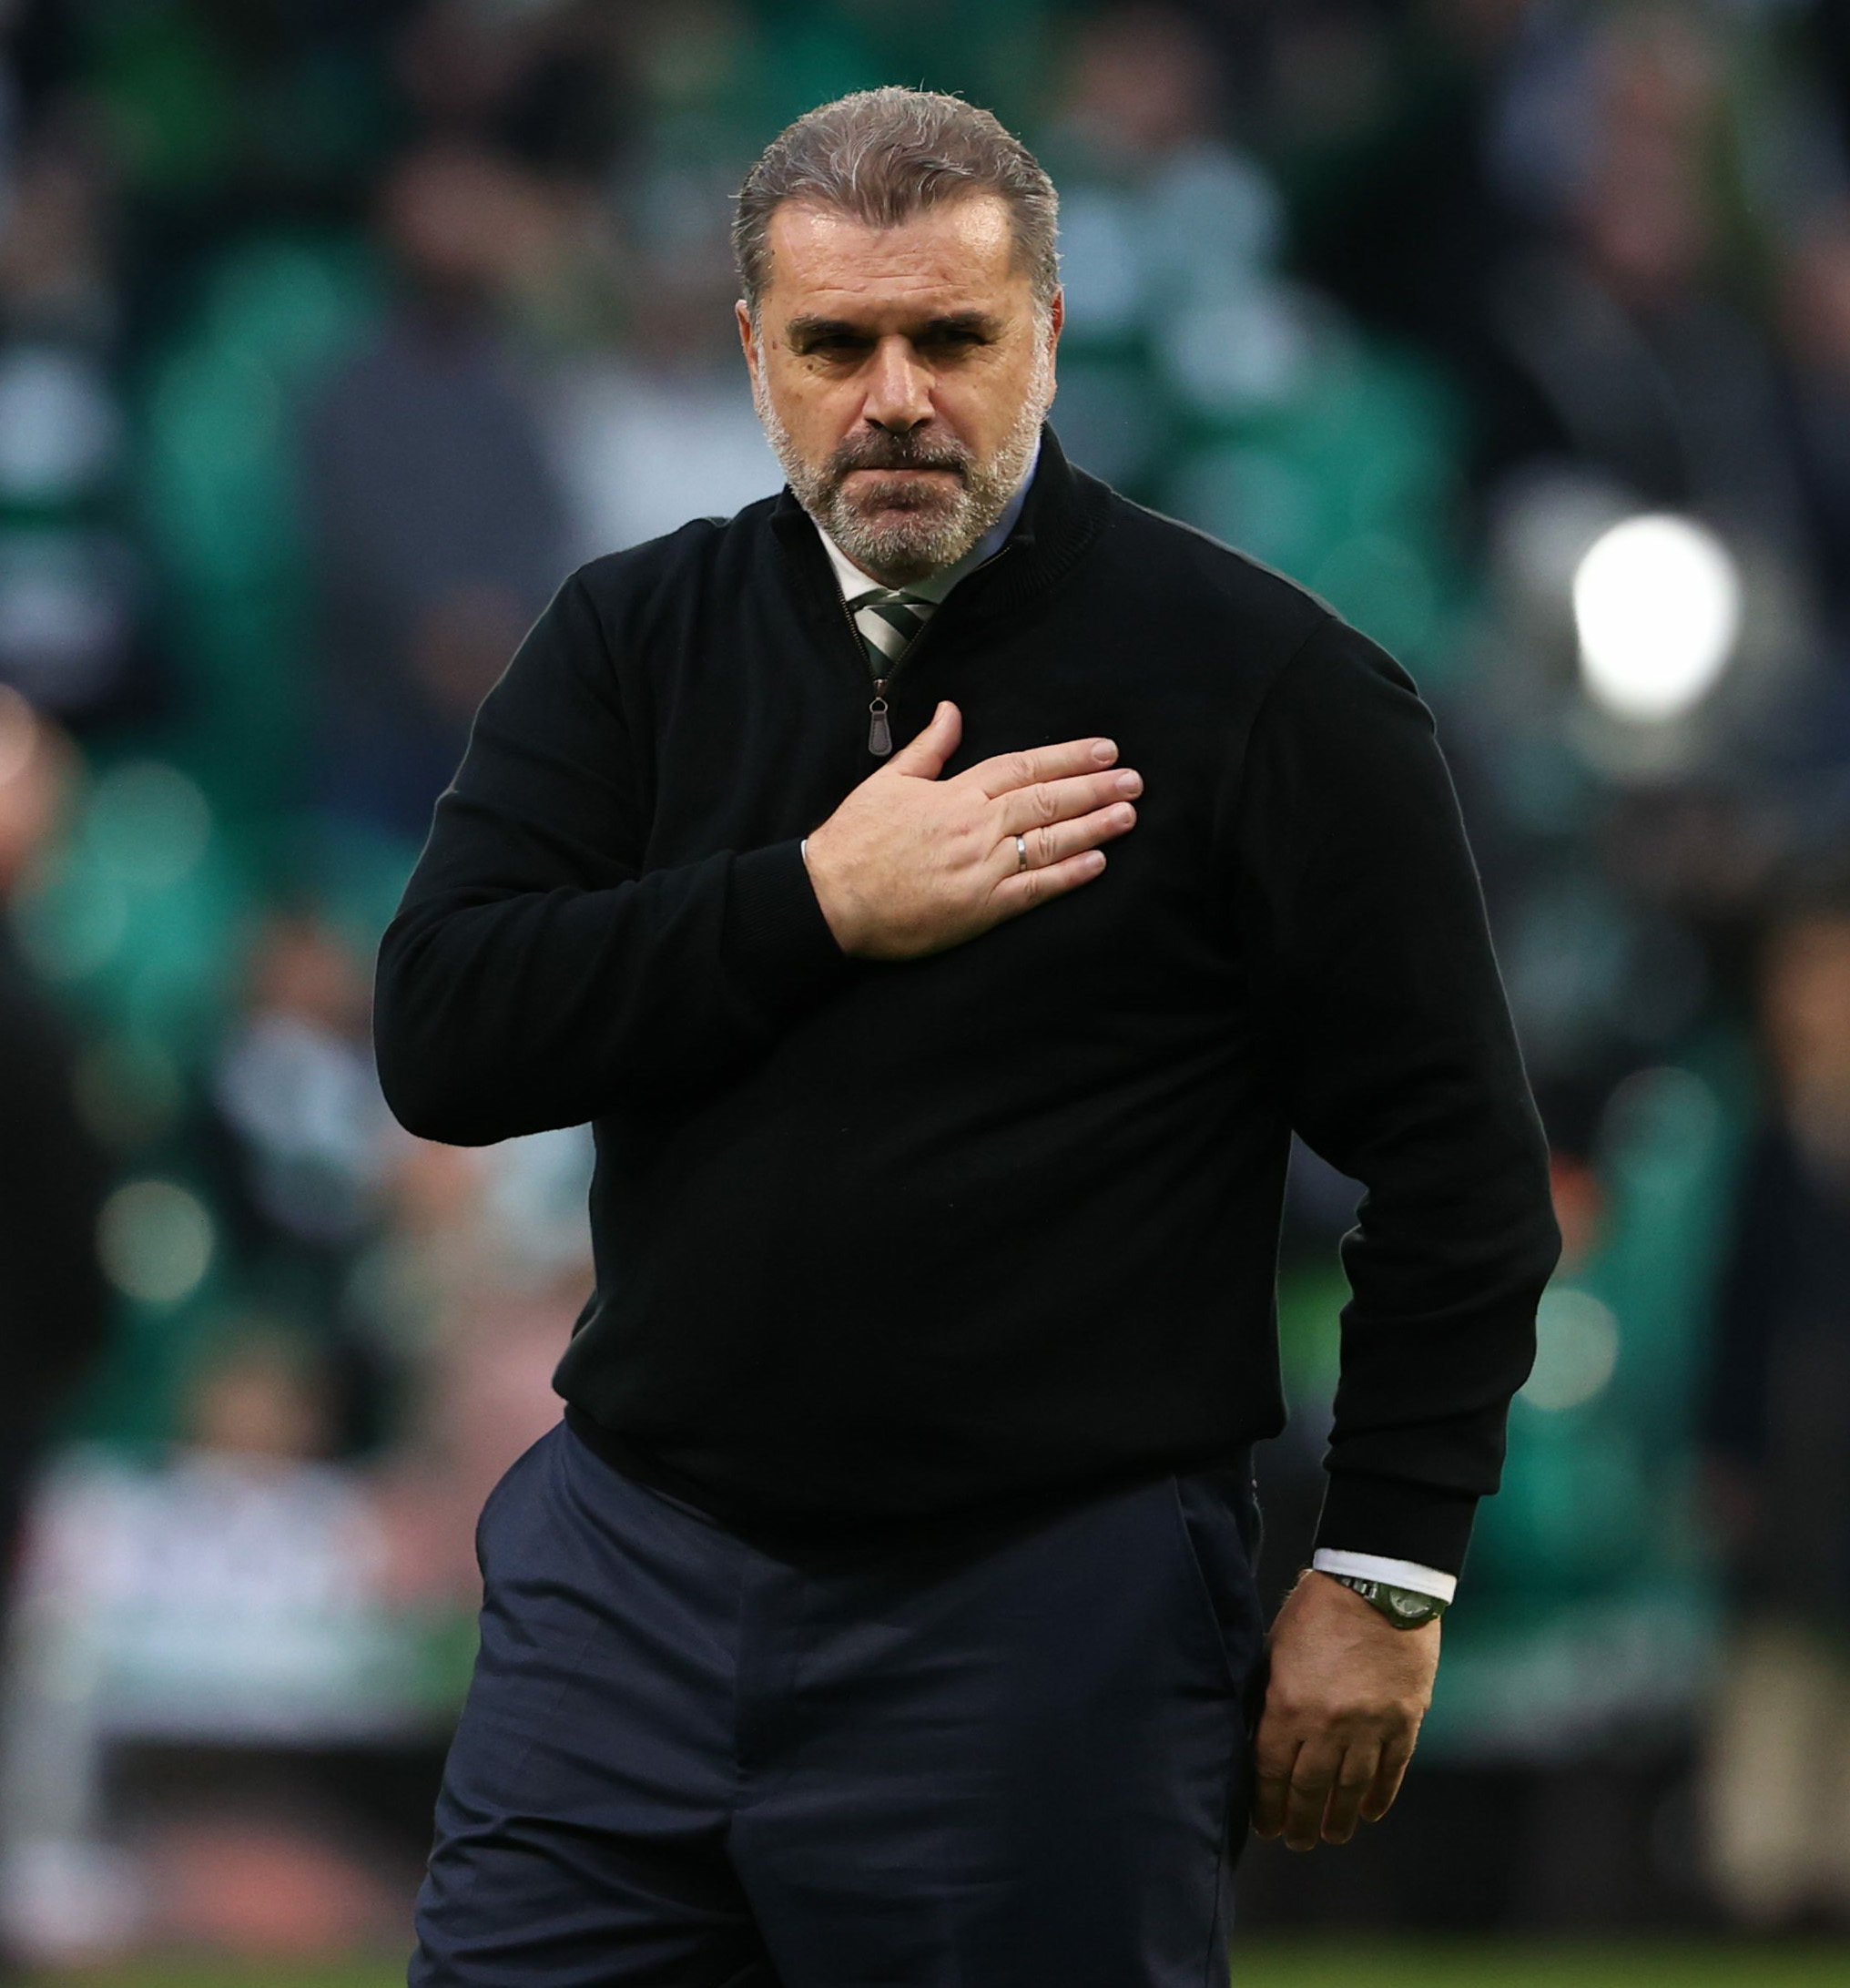 Ange Postecoglou grateful to Celtic fans for taking him to their hearts: 'It's something I value and cherish'